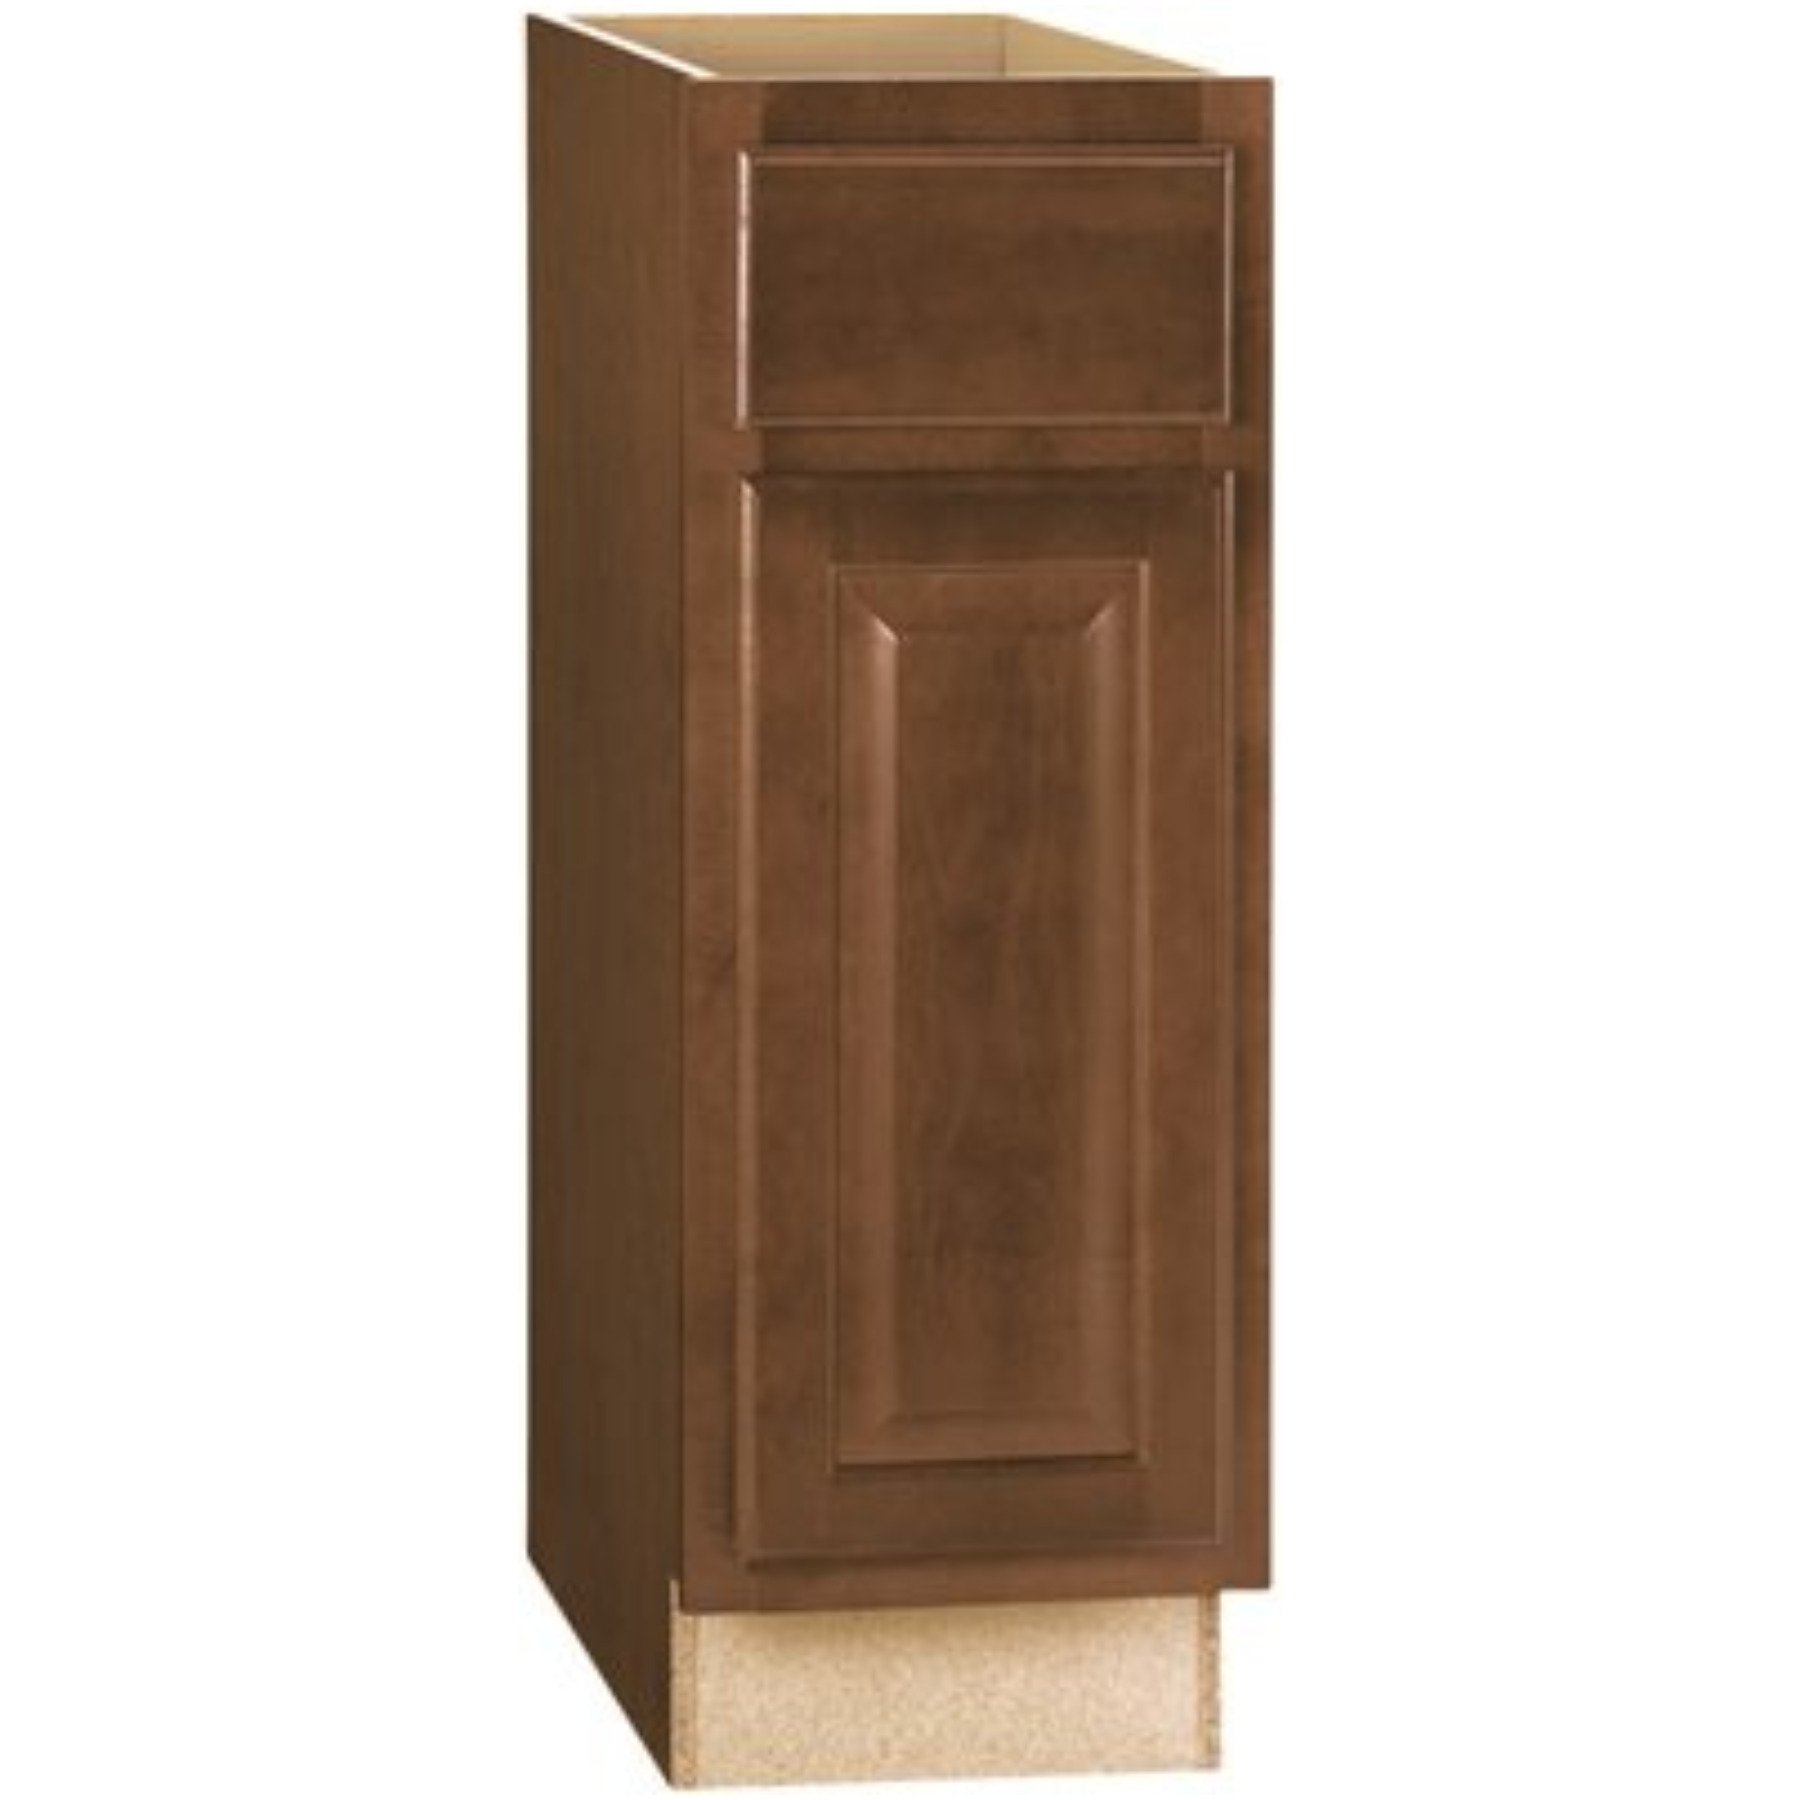 RSI HOME PRODUCTS HAMILTON BASE CABINET, FULLY ASSEMBLED, RAISED PANEL, CAFE, 12X34-1/2X24 IN.